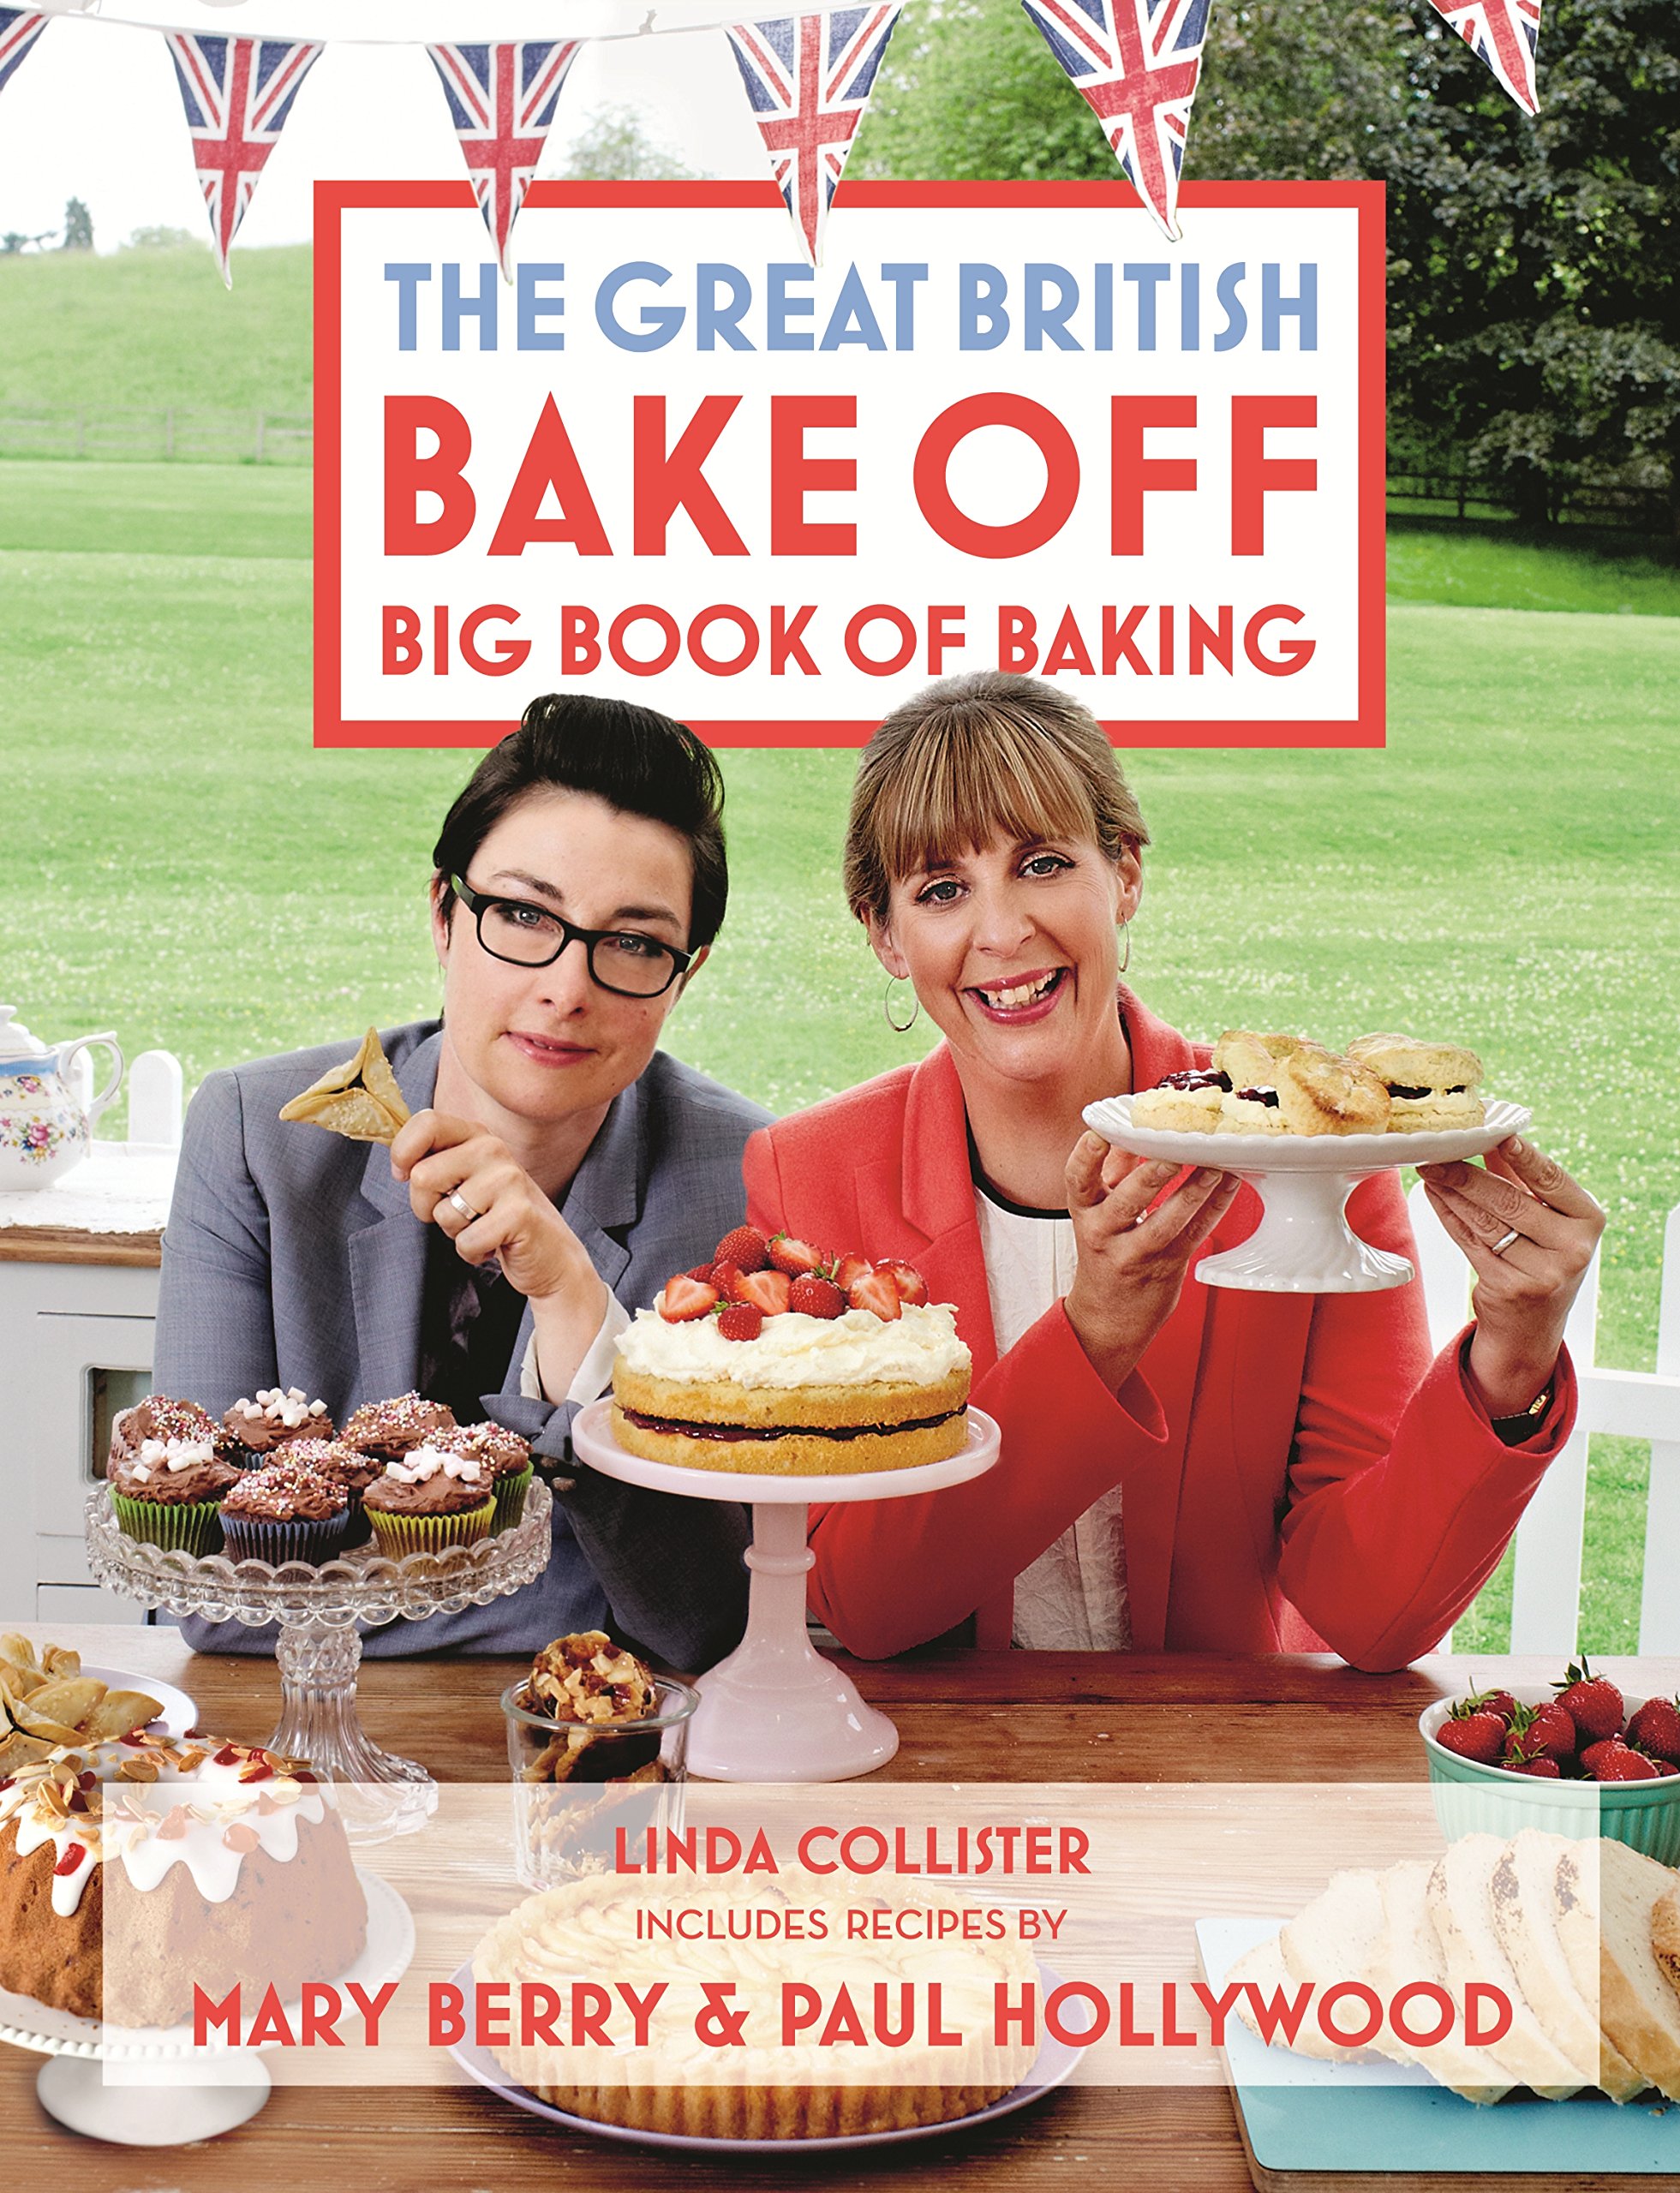 Shop - The Great British Bake Off | The Great British Bake Off